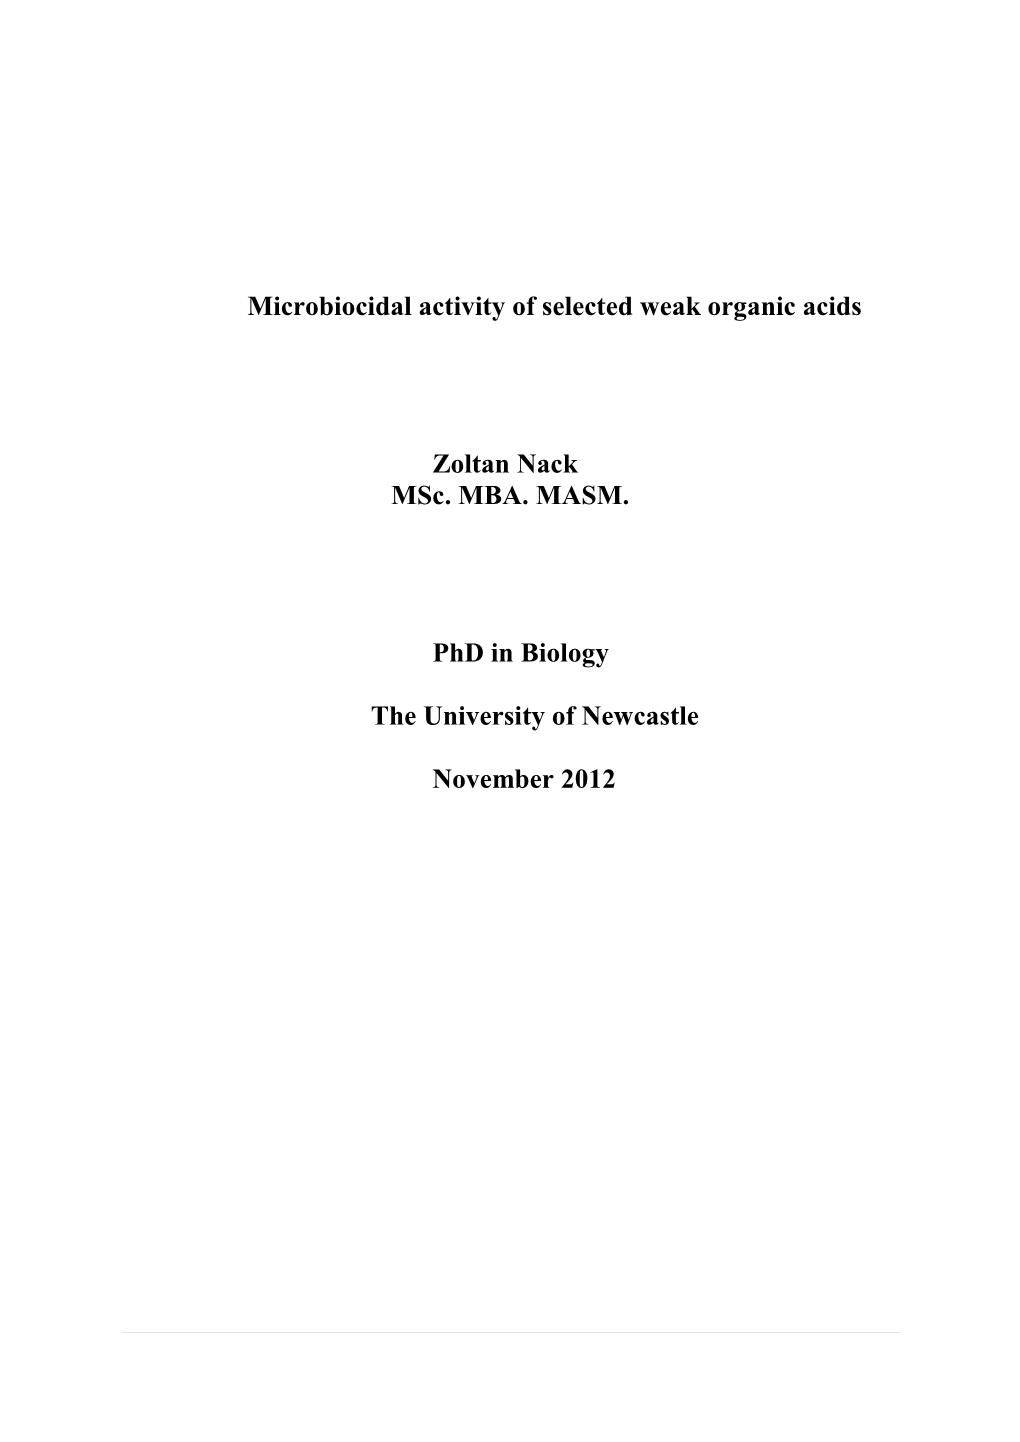 Microbiocidal Activity of Selected Weak Organic Acids Zoltan Nack Msc. MBA. MASM. Phd in Biology the University of Newcastle